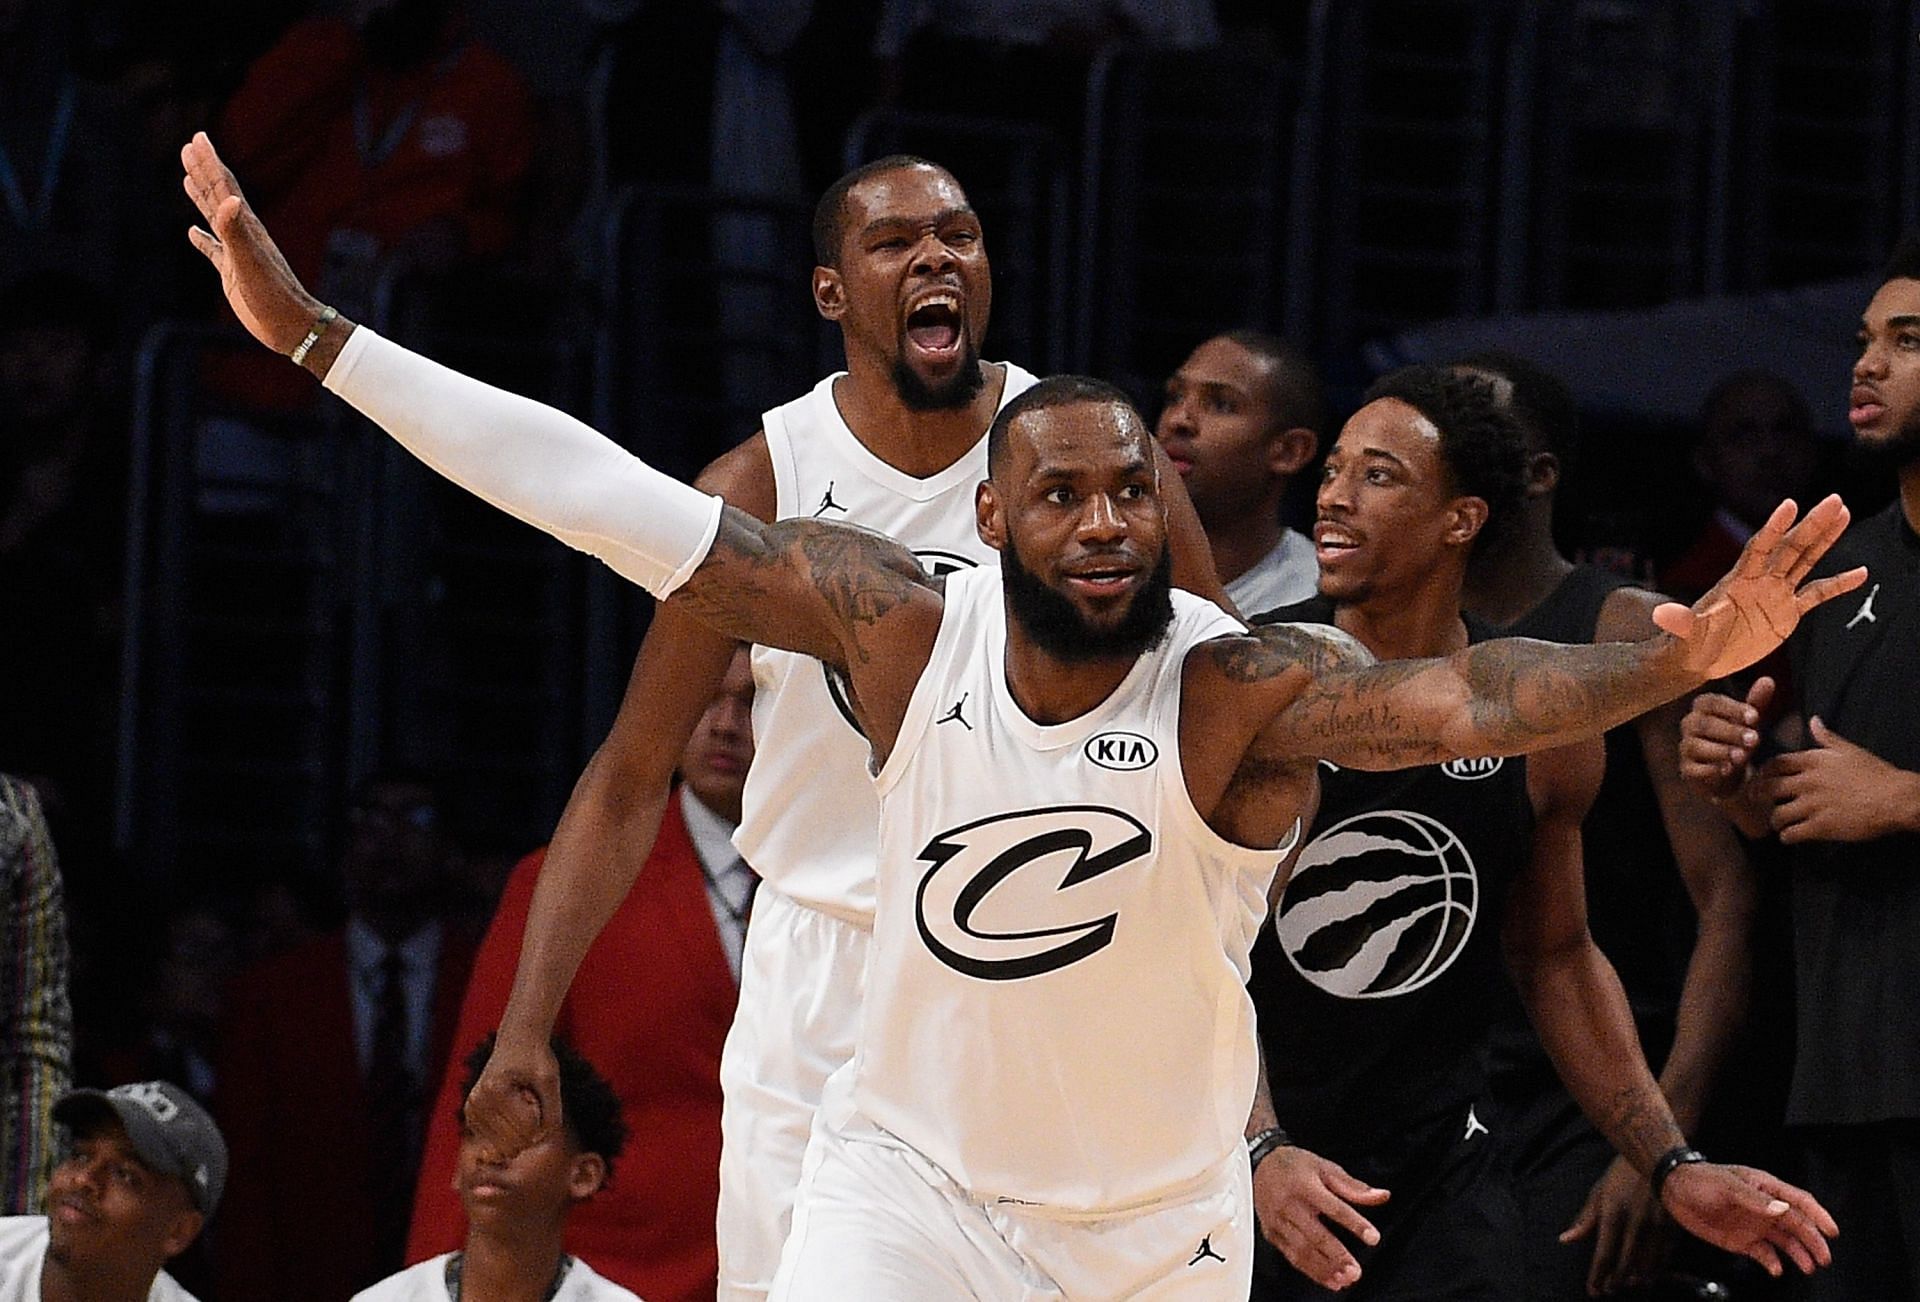 Kevin Durant and LeBron James at the 2018 NBA All-Star Game.